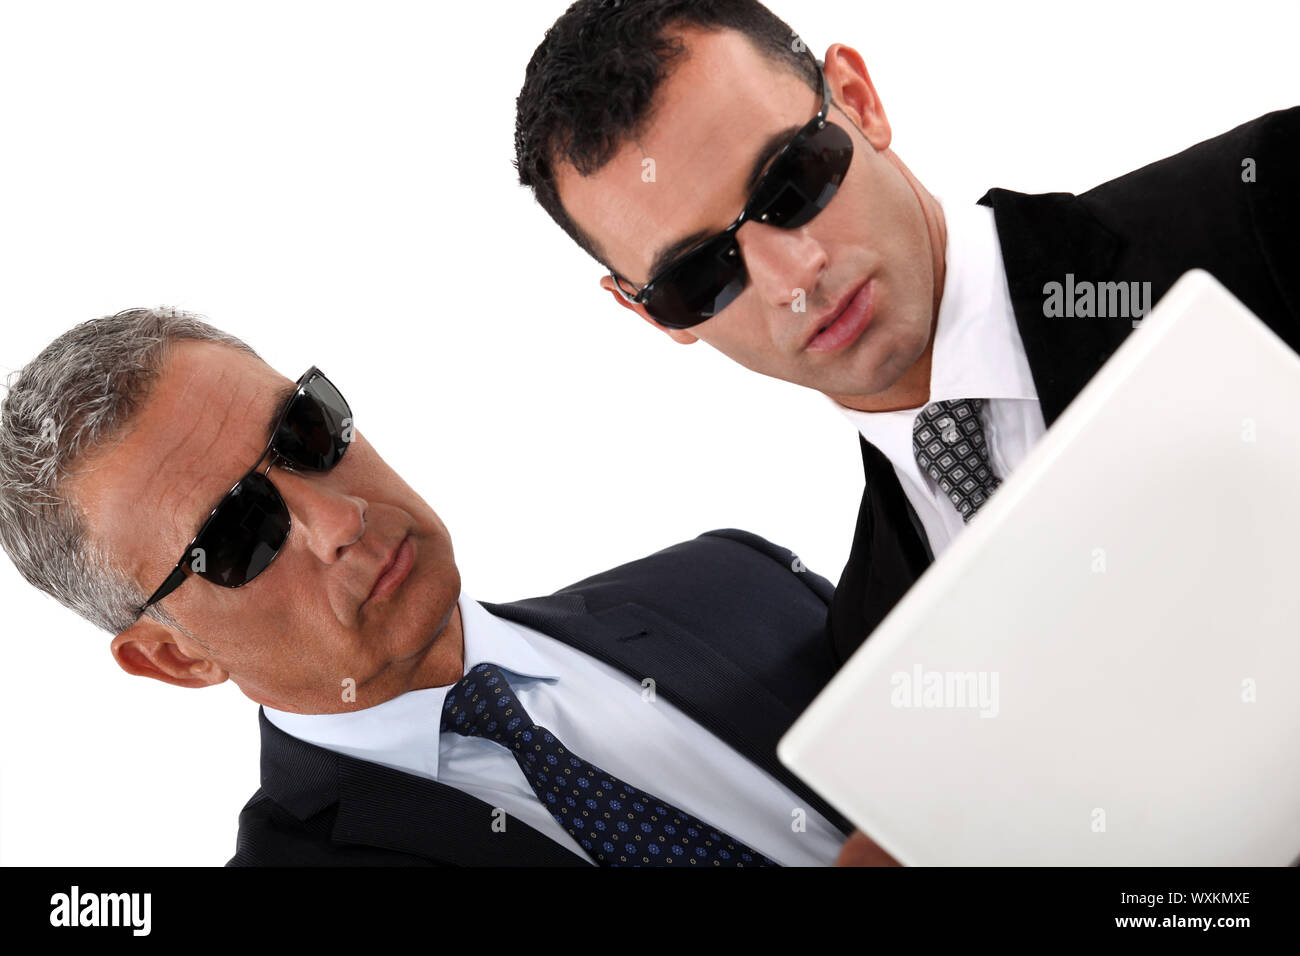 Father and son con man team Stock Photo